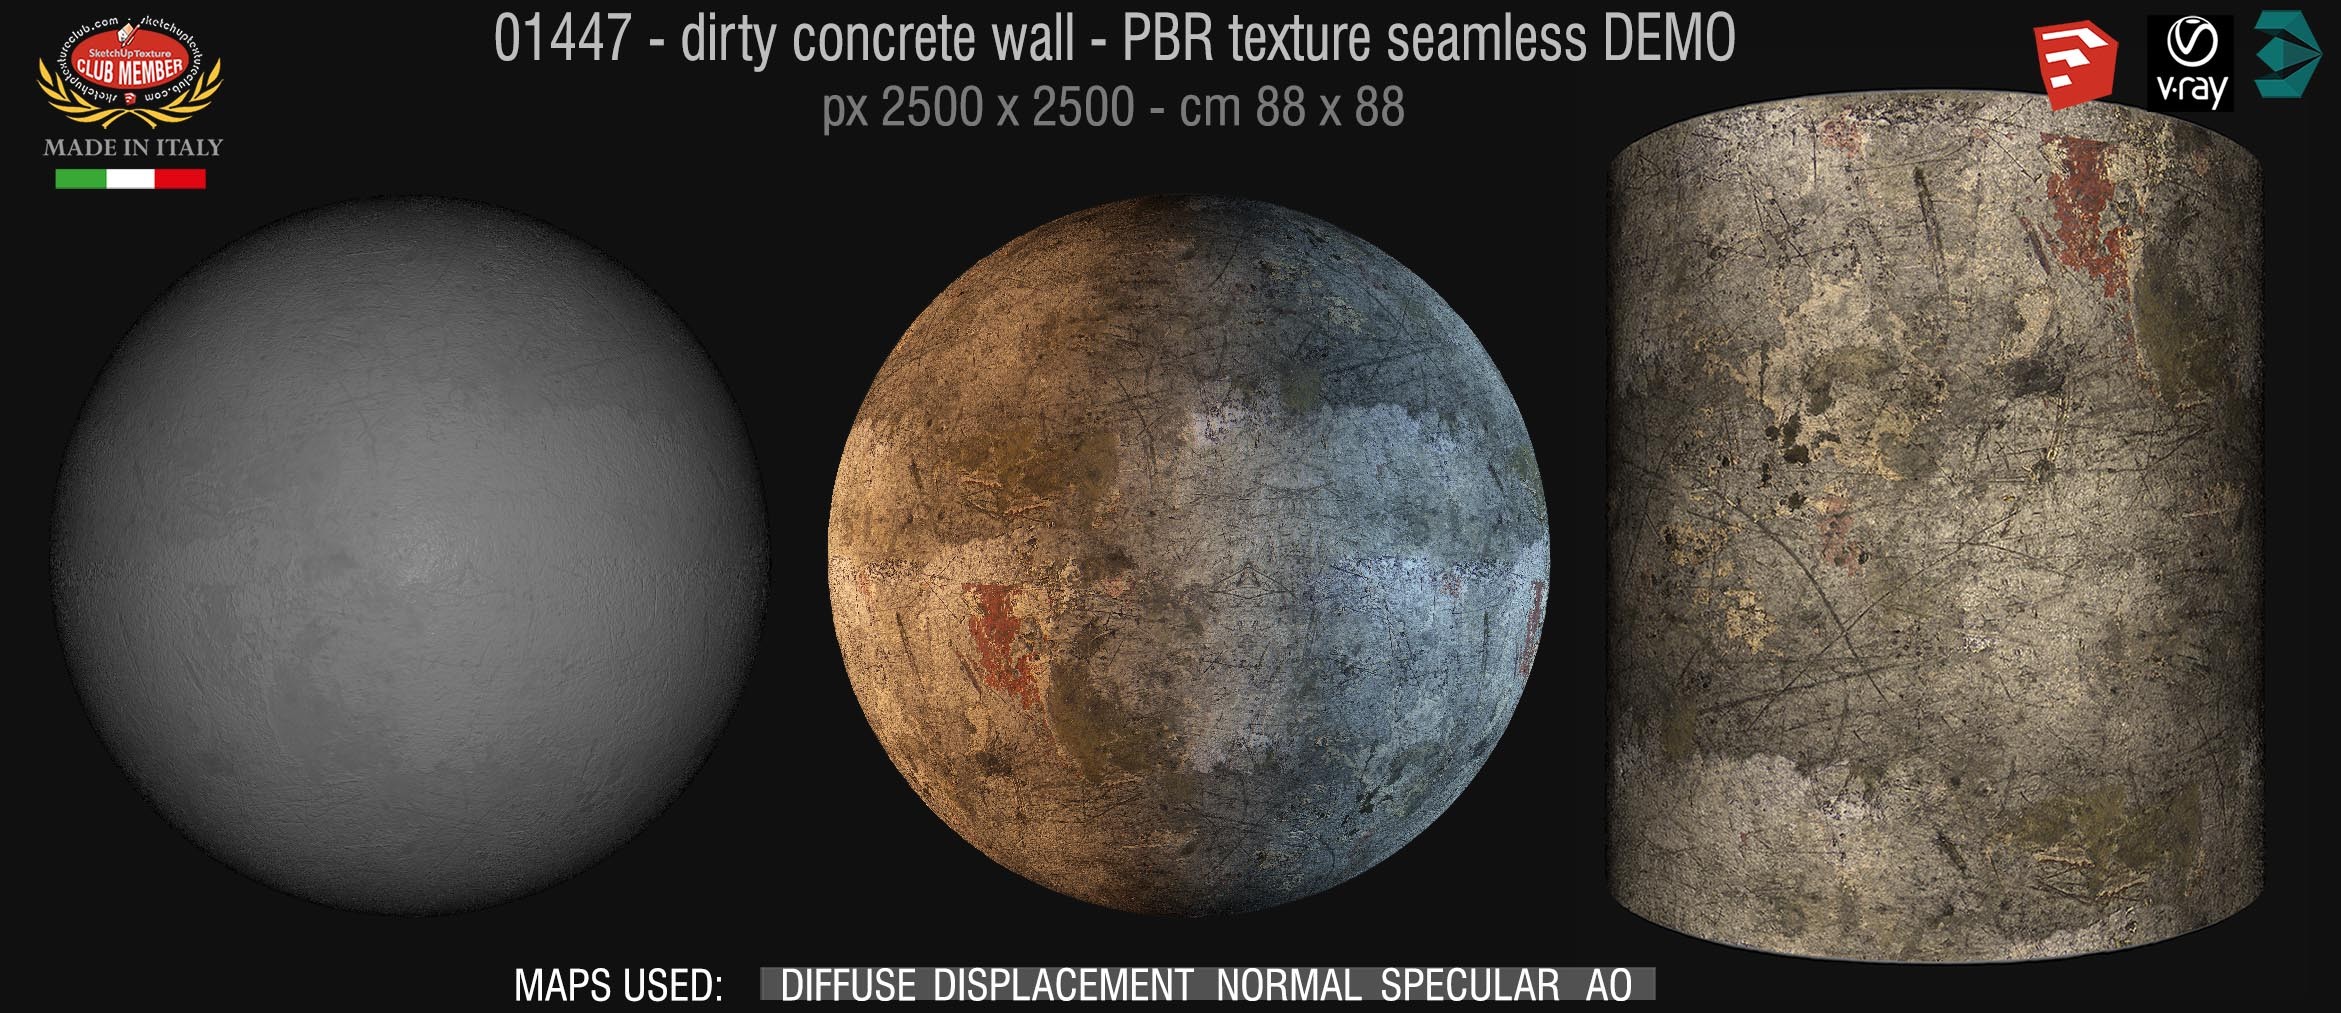 01447 Concrete bare dirty wall PBR texture seamless DEMO